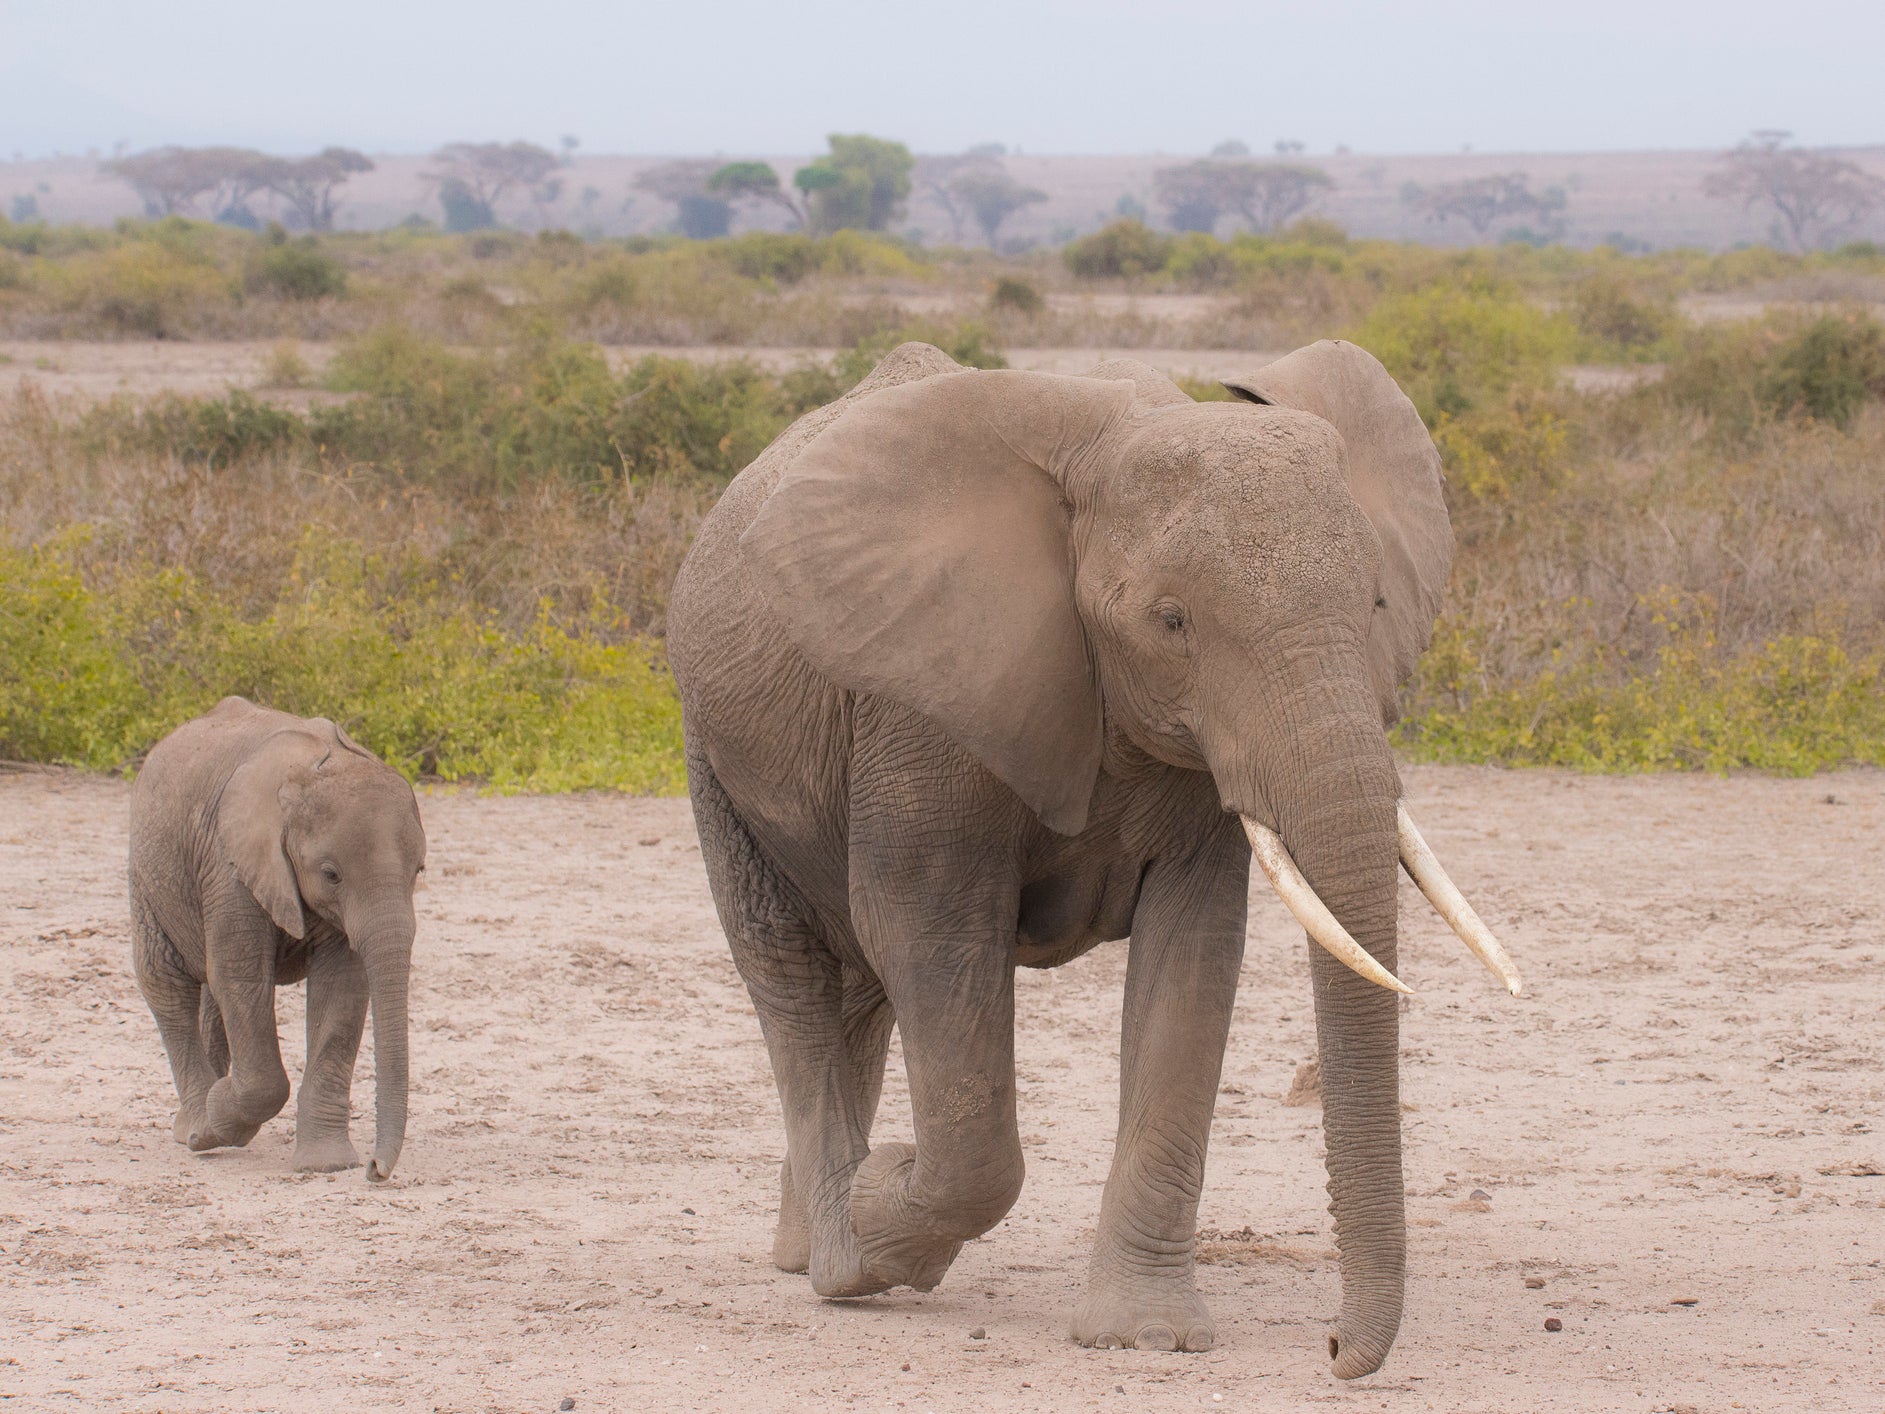 Around 10,000 to 15,000 African elephants are poached every year – roughly 40 a day – to satisfy international demand for ivory